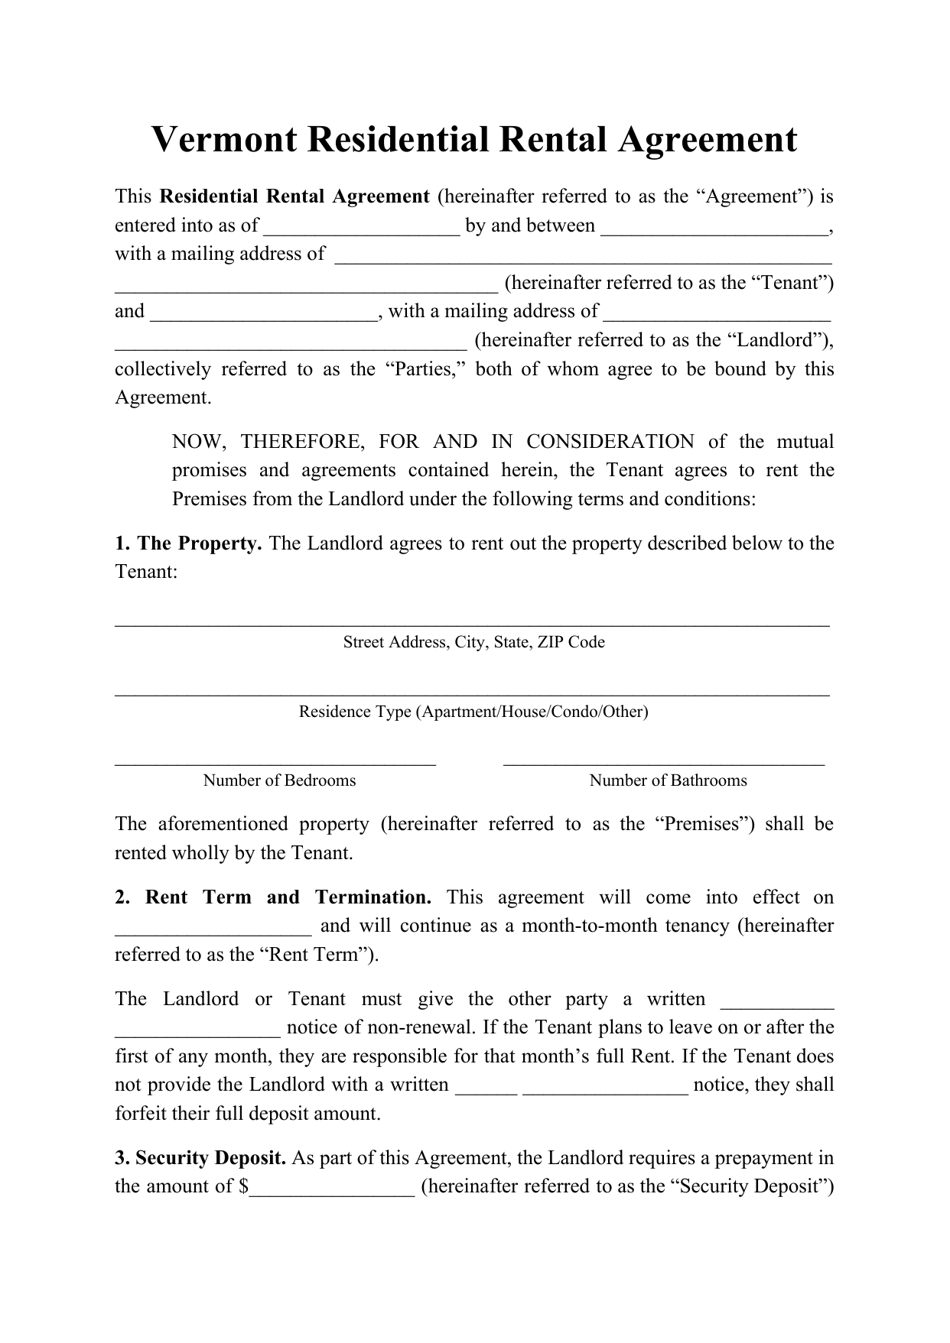 Residential Rental Agreement Template - Vermont, Page 1